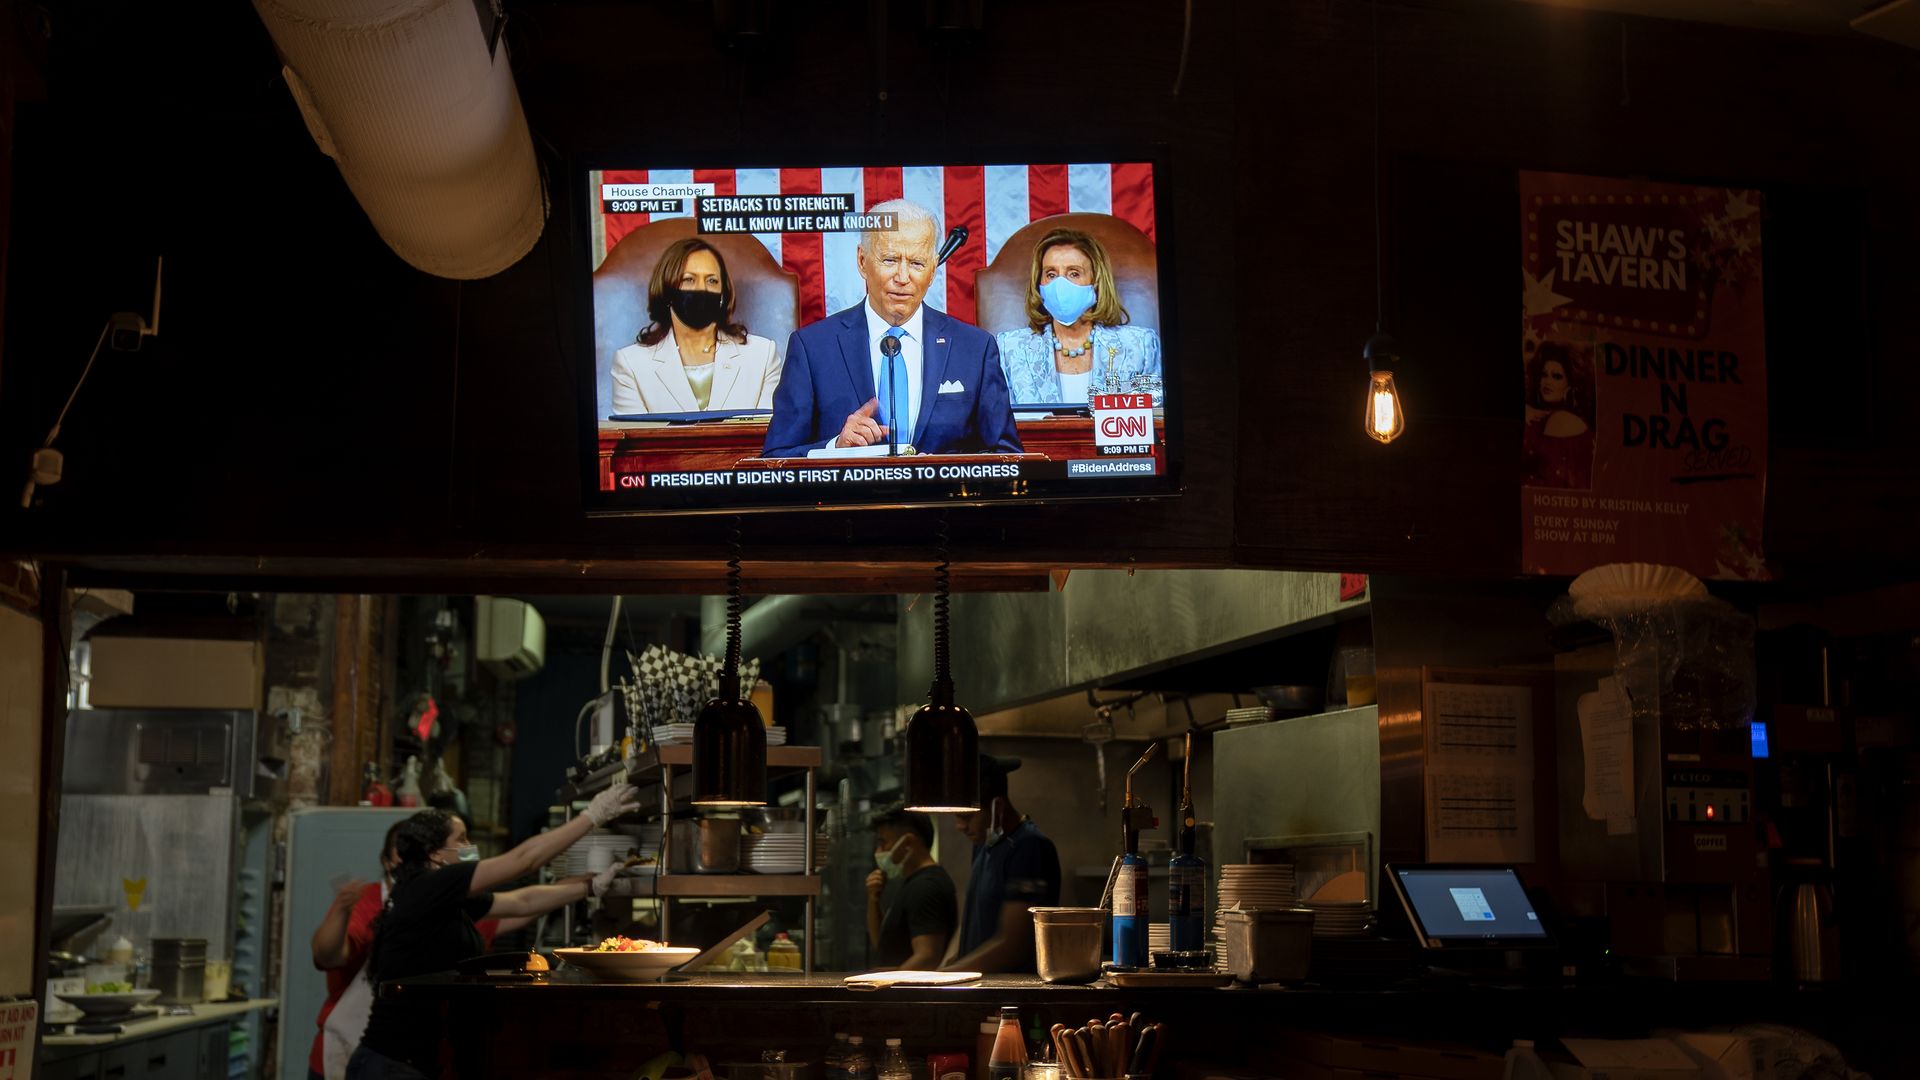 Photo of a TV screen showing Biden as he gives a speech, the TV hangs over a kitchen space in a restaurant